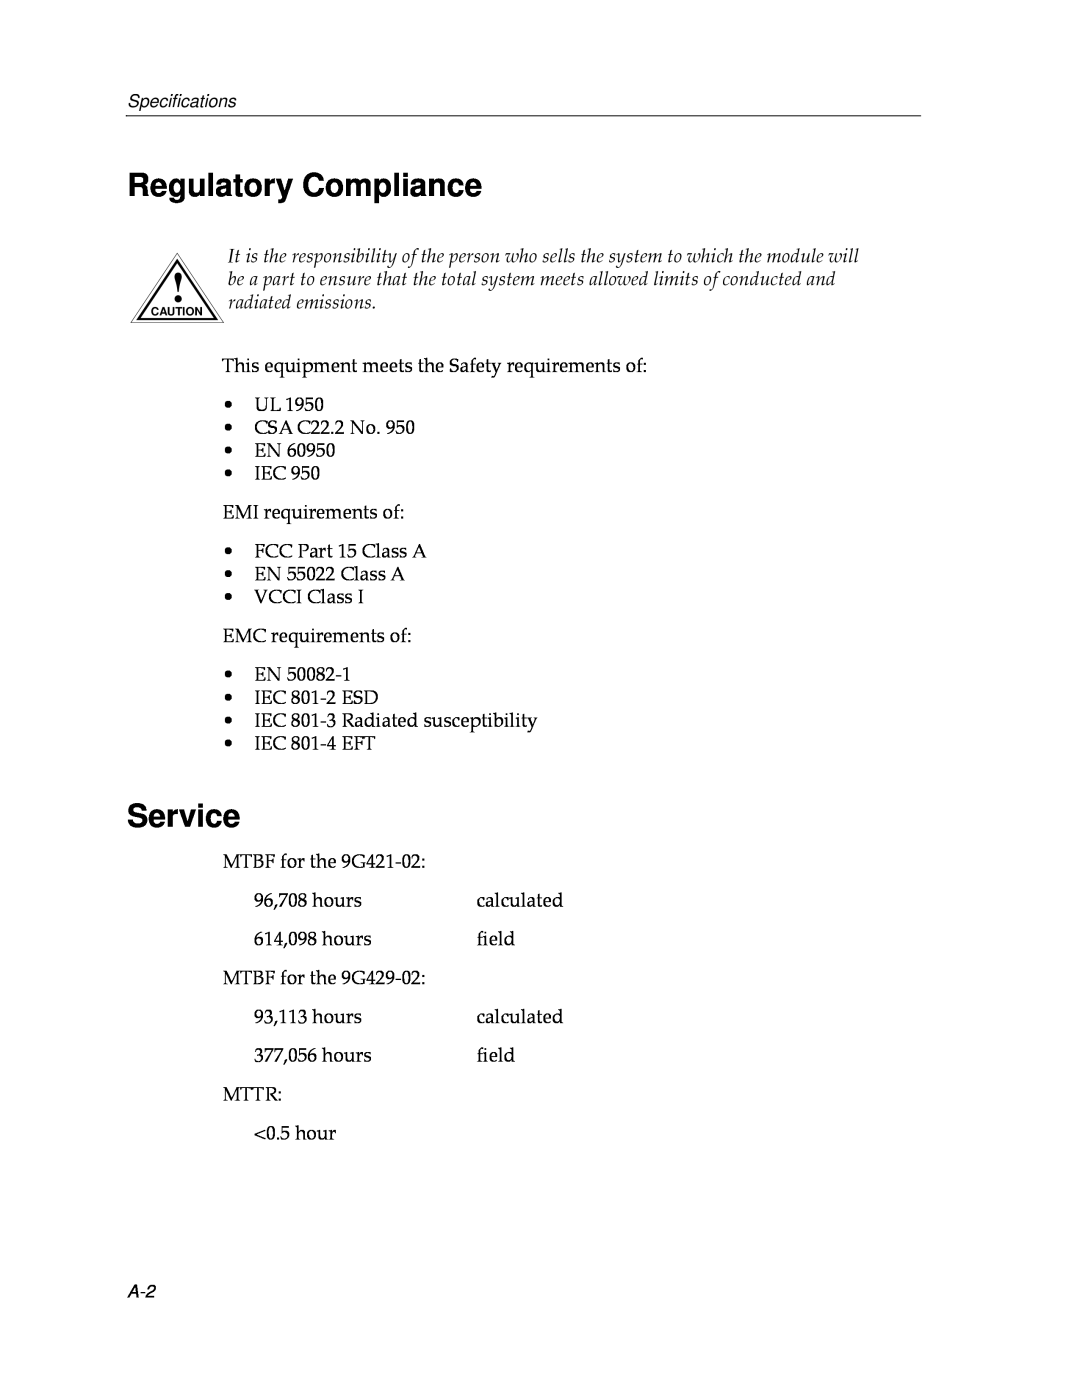 Cabletron Systems 9000 manual Regulatory Compliance, Service, Speciﬁcations 